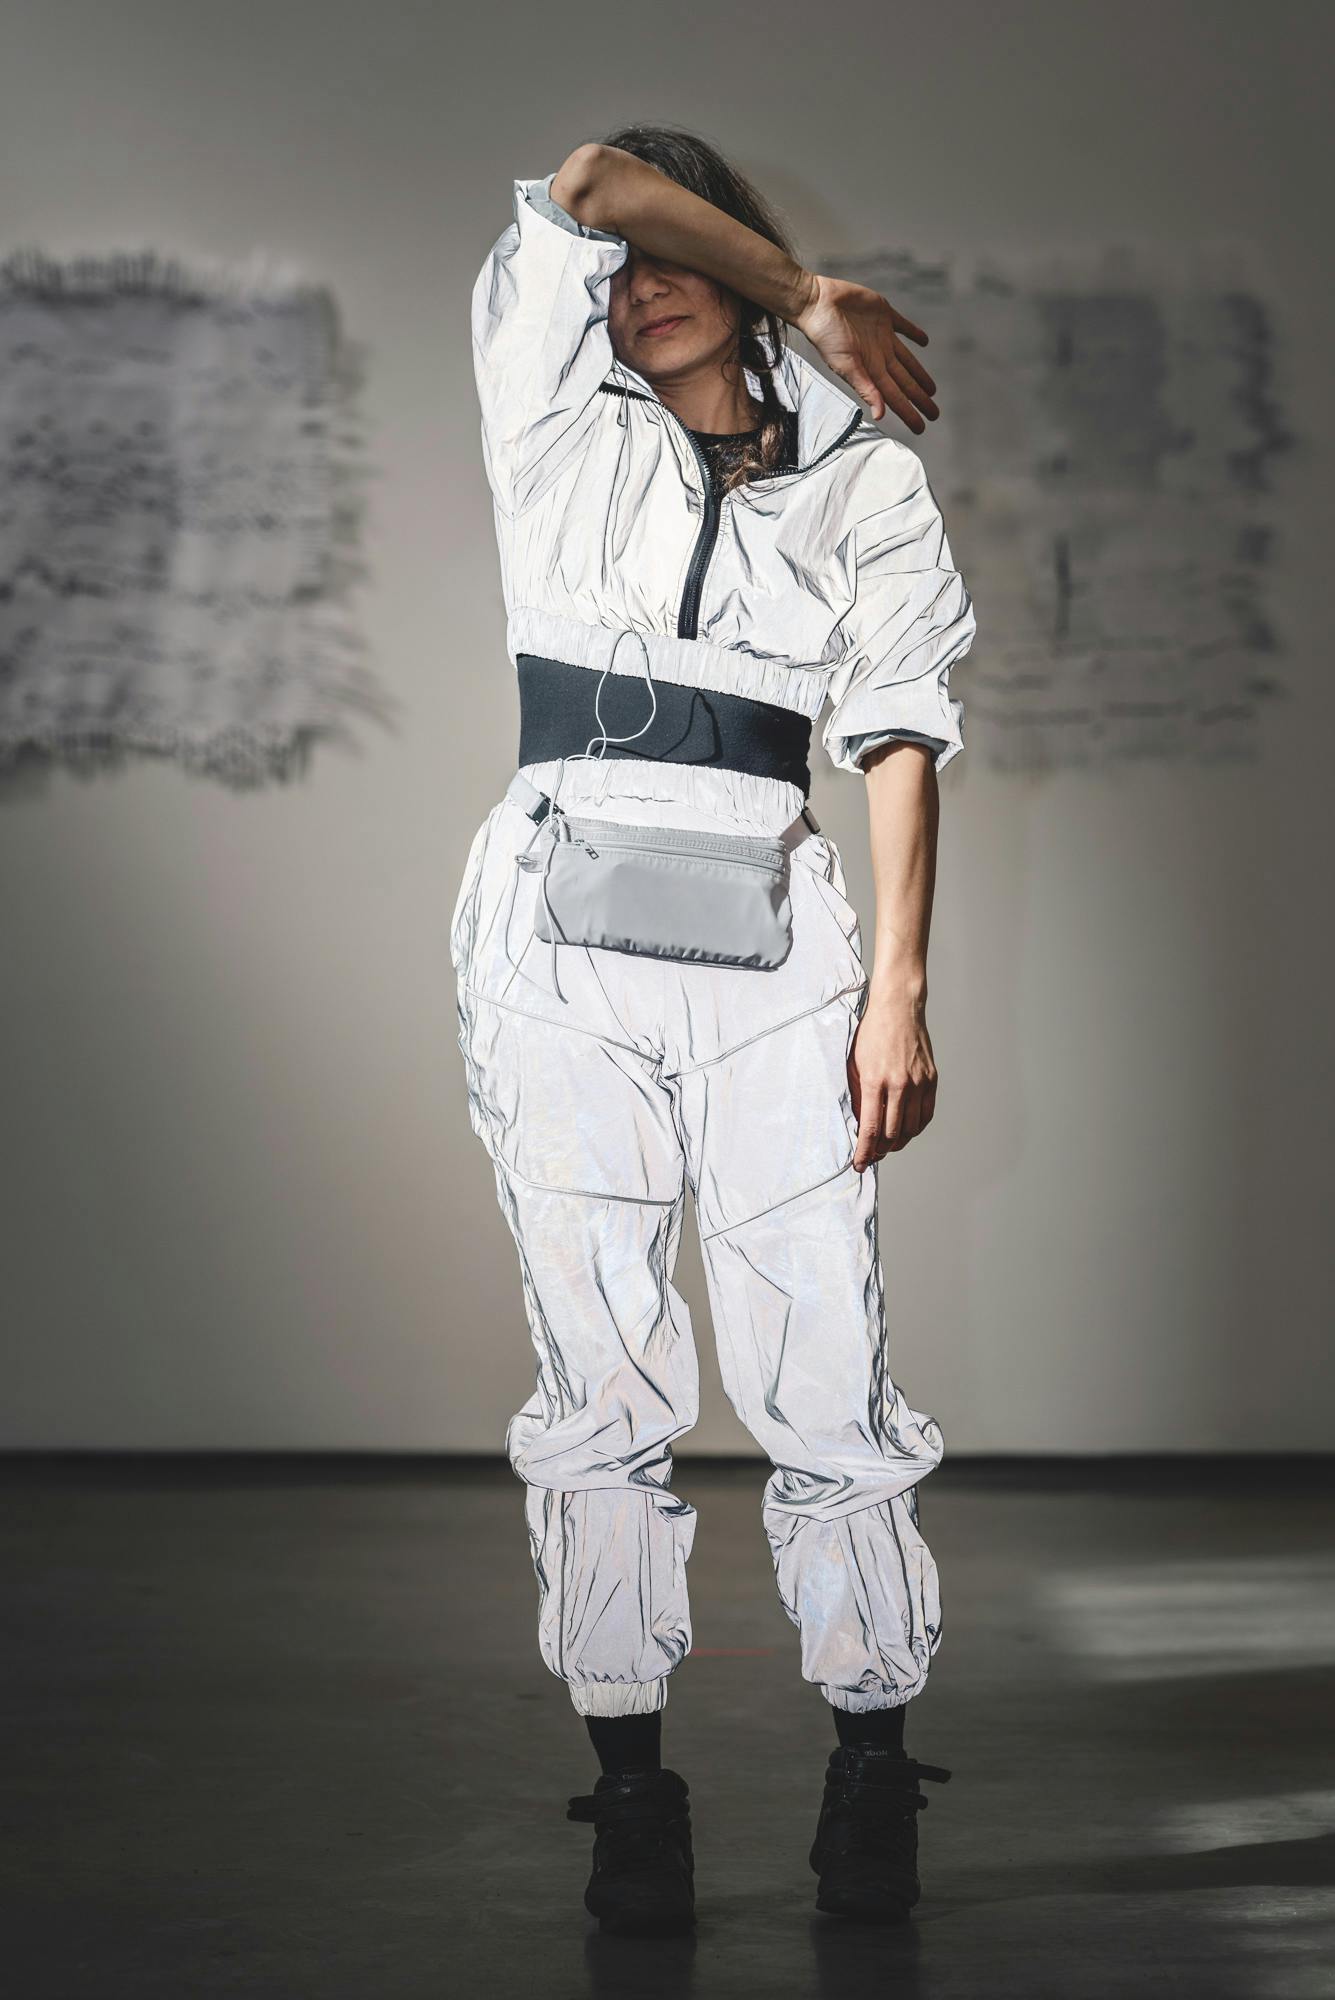 An image of Justine A. Chambers performing choreography in a gallery space. Chambers is wearing a silver jumpsuit. 